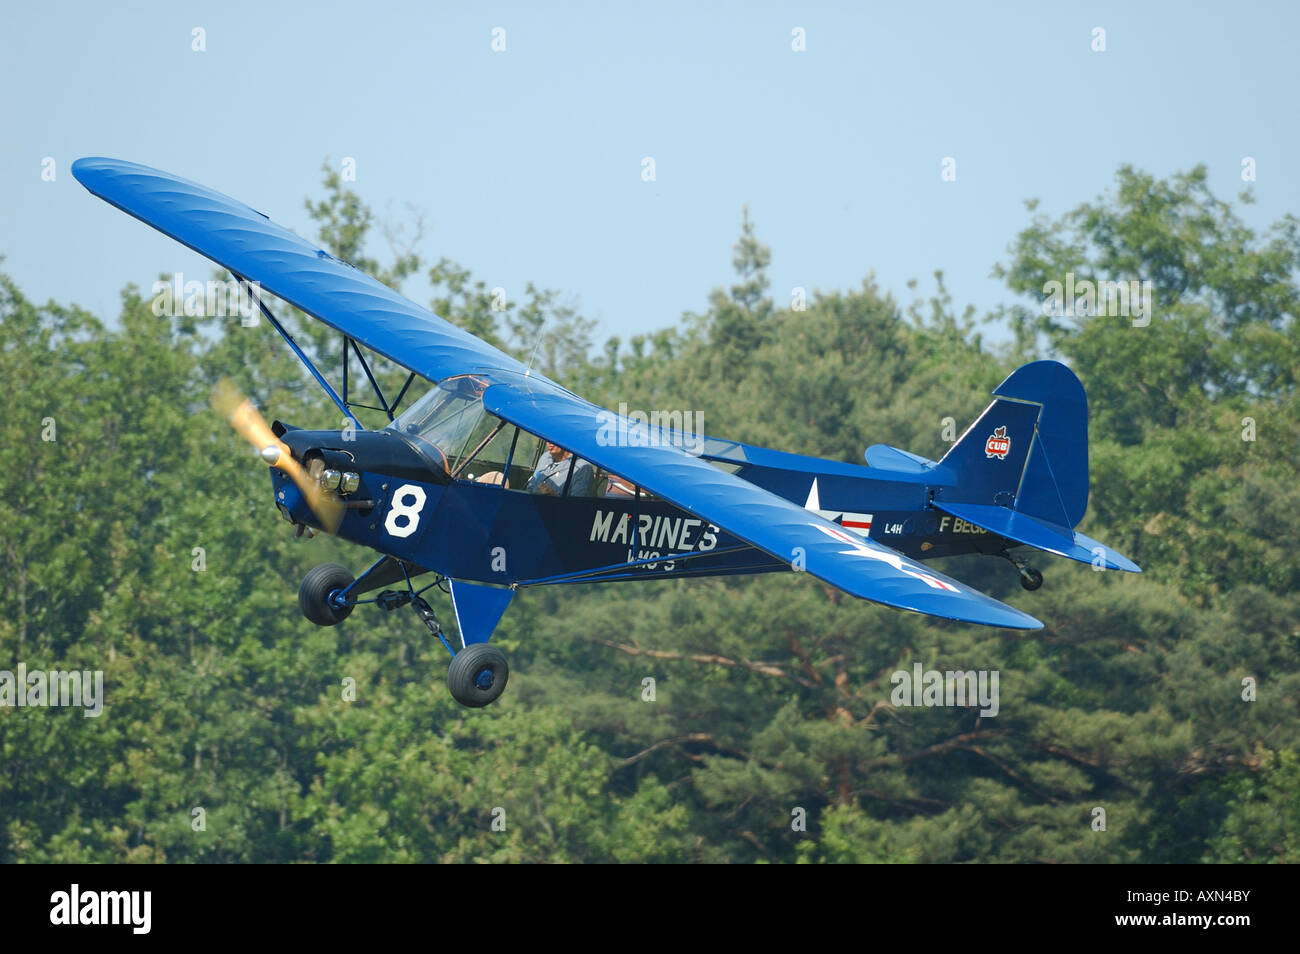 Piper J-3 Cub (L-4) with WWII US Marines colors, french vintage air show at La Ferte Alais, France Stock Photo